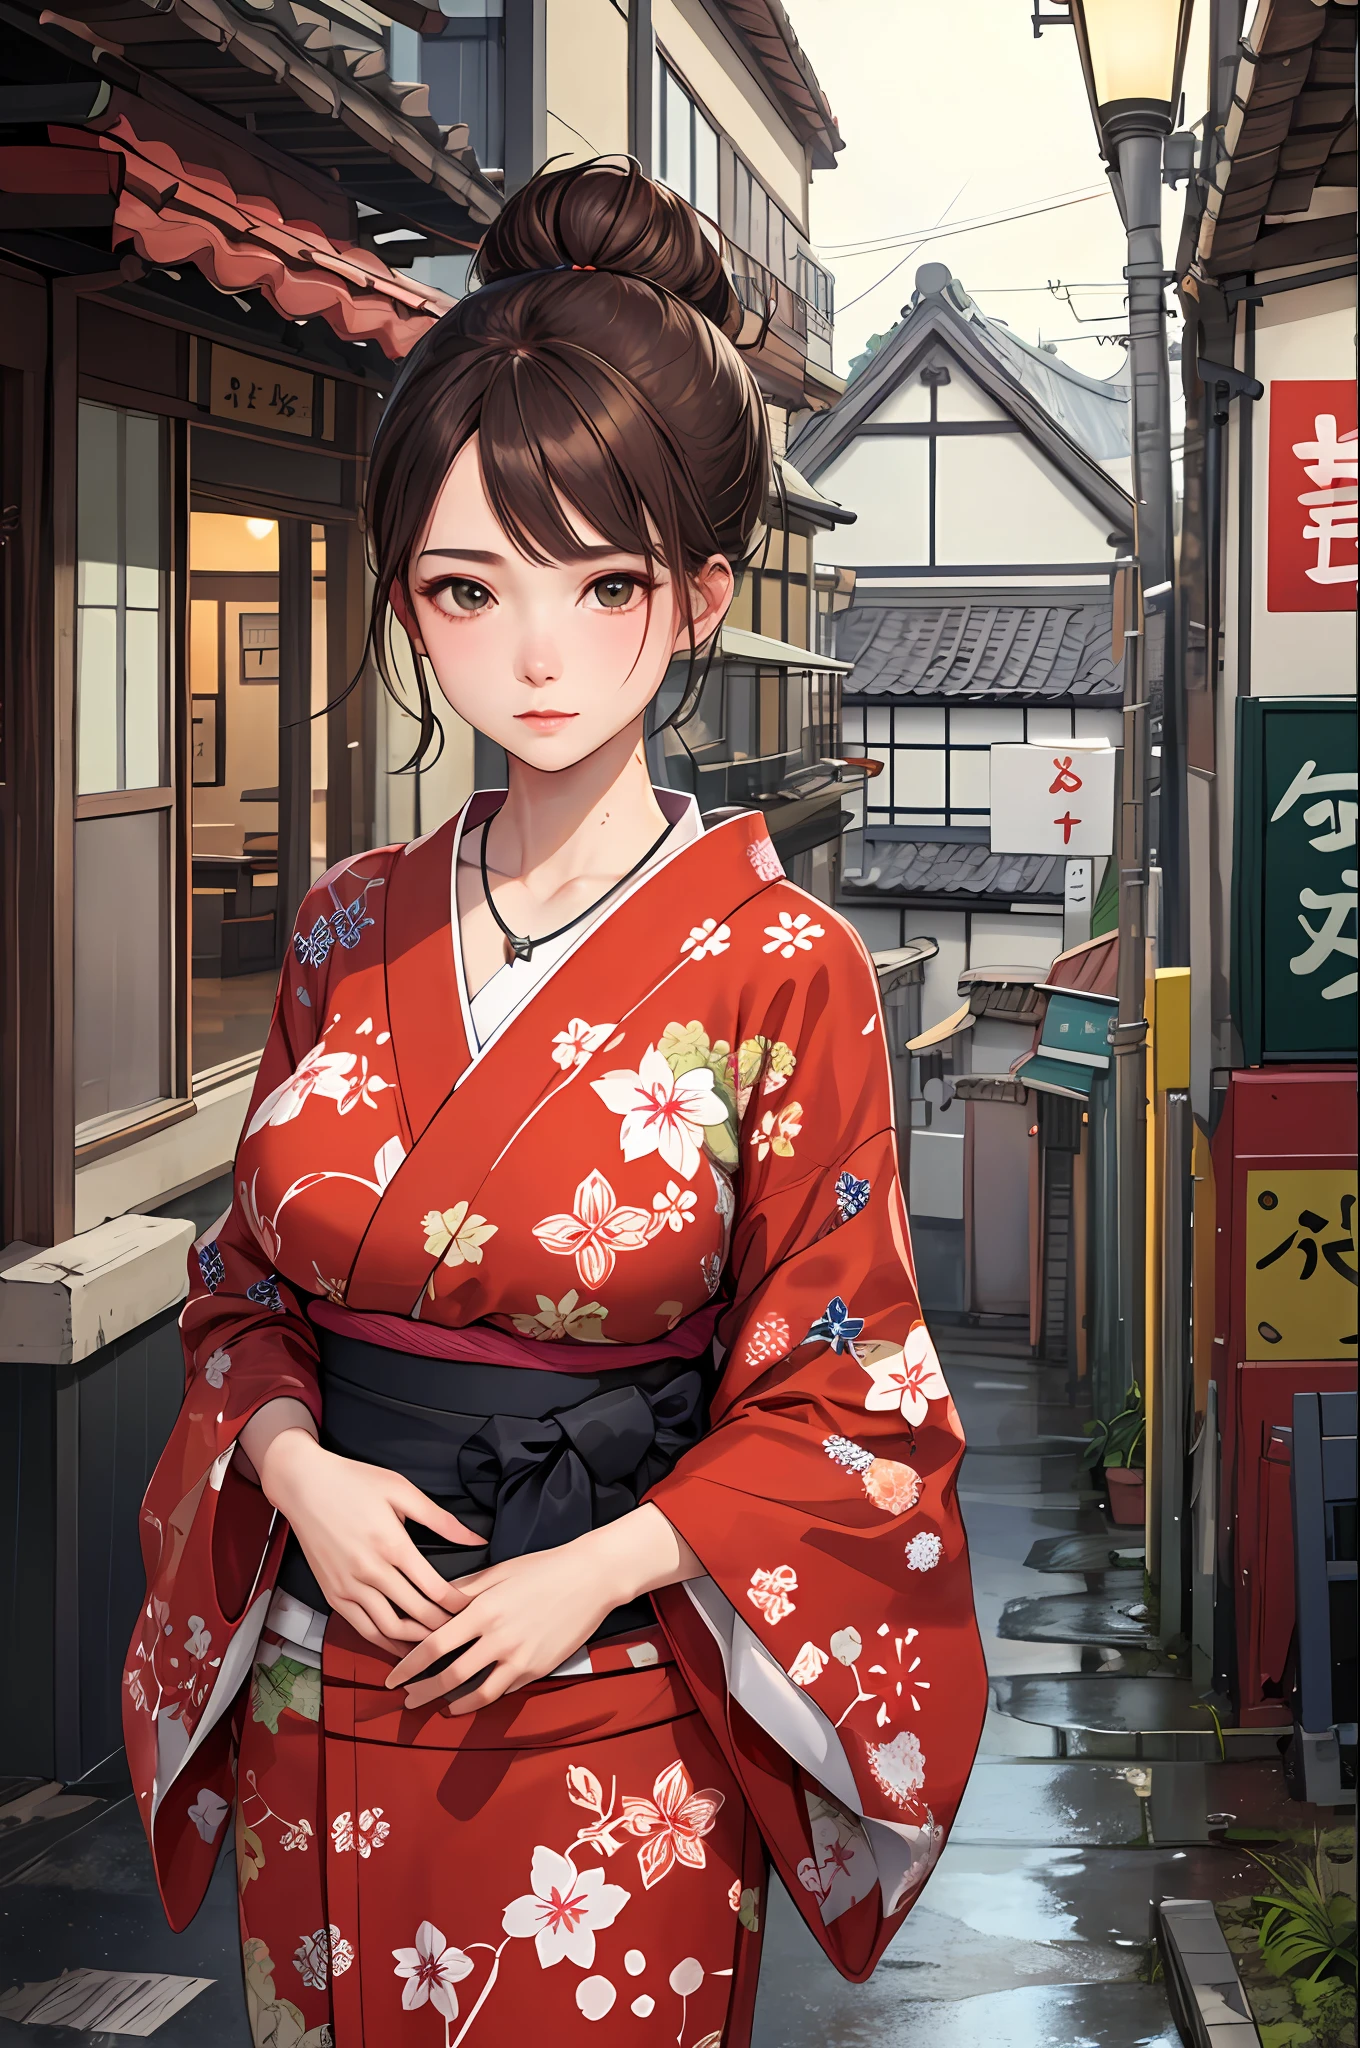 masterpiece, top quality, realistic, subsurface scattering, chromatic lighting,

Colorization, red + white + green + black limited color palette, detailed concept drawing, line art, illustration, brown hair, big breasts

fashion, printed yukata,

18 years old 1 girl, medium soft breasts, slender, hair up,

shy, straight hair, necklace, revealing, Japan, town, street, rain, wet,